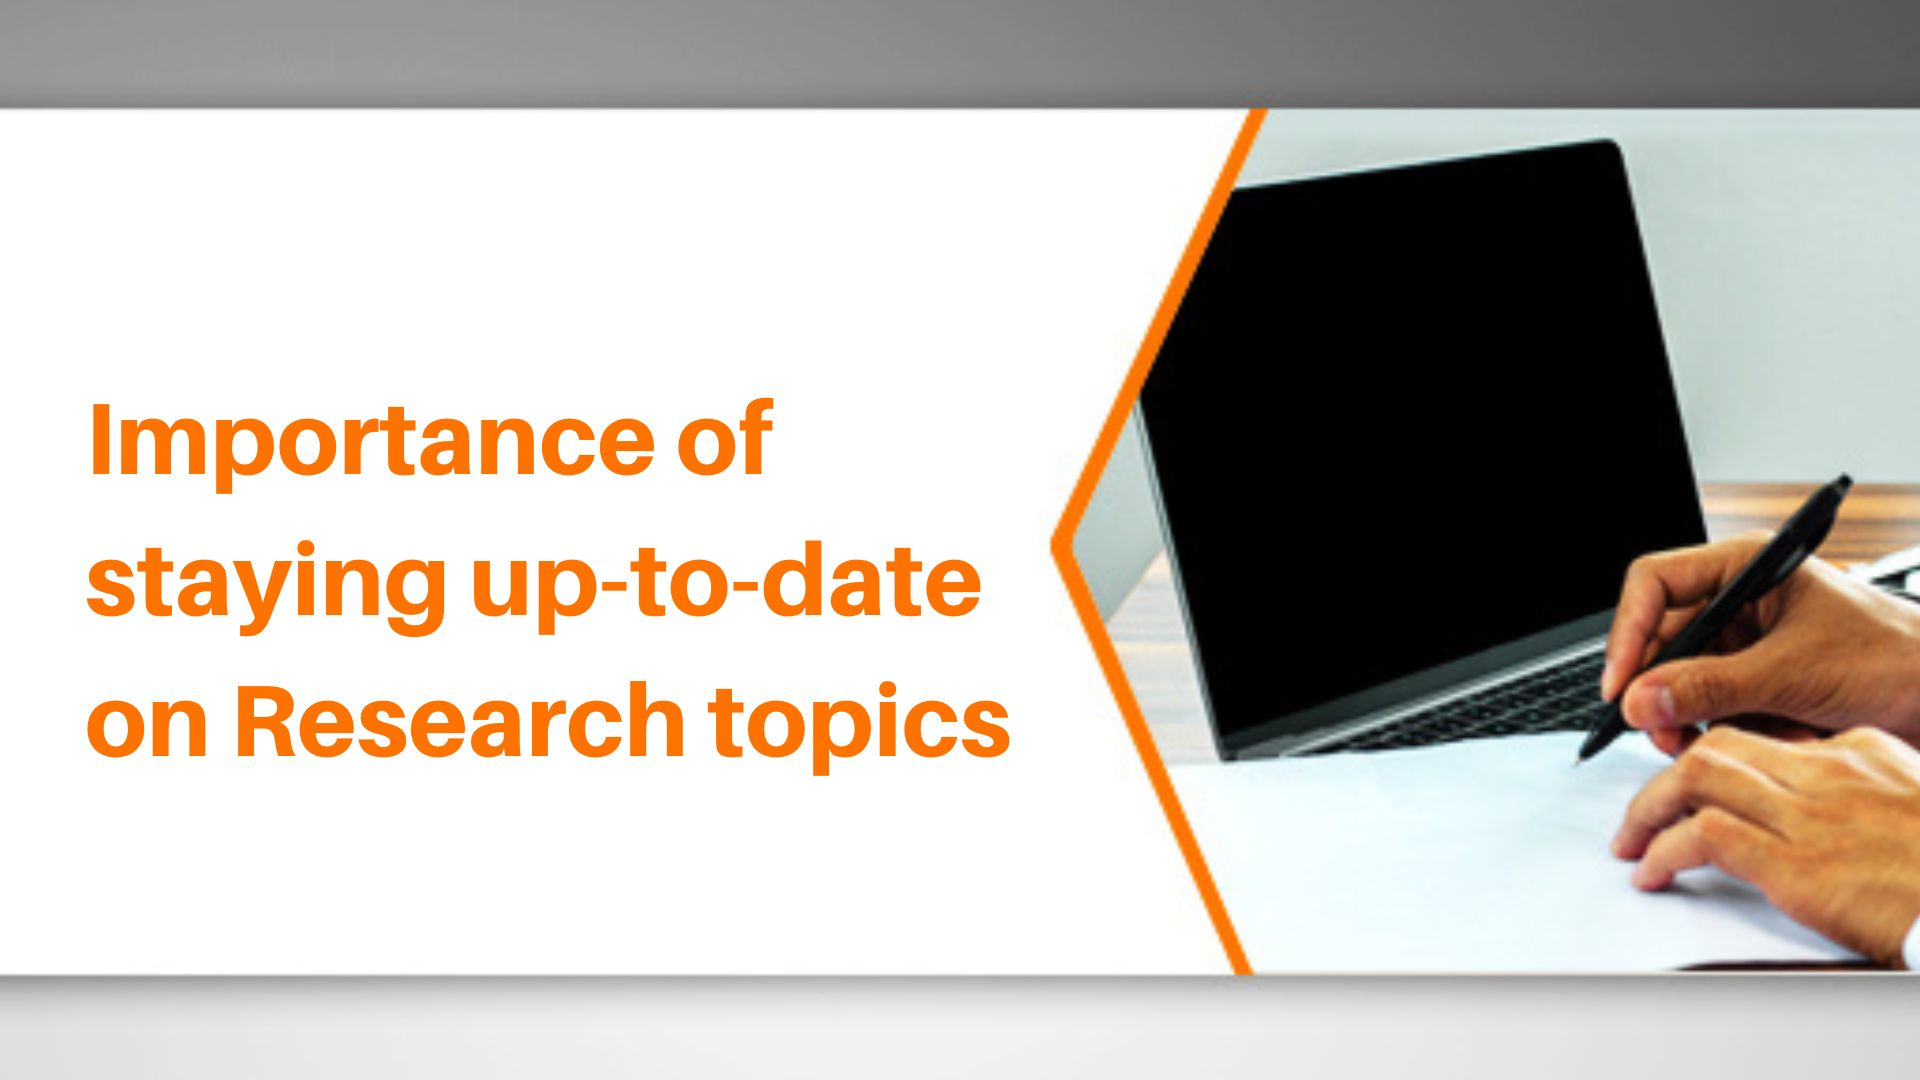 Importance of staying up-to-date on Research topics